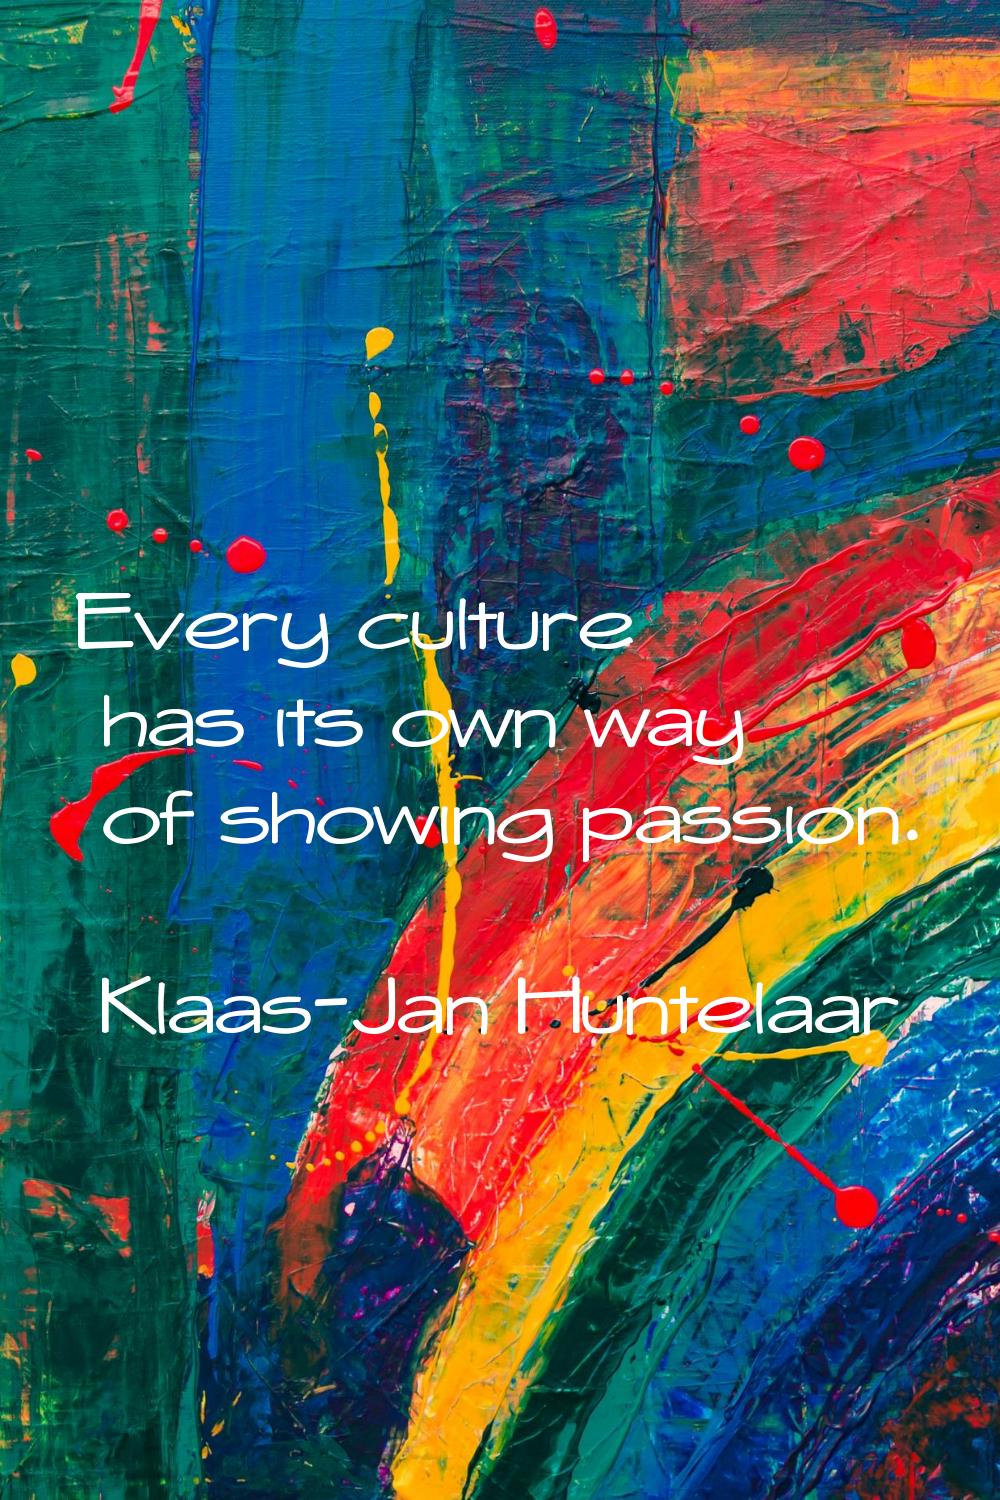 Every culture has its own way of showing passion.